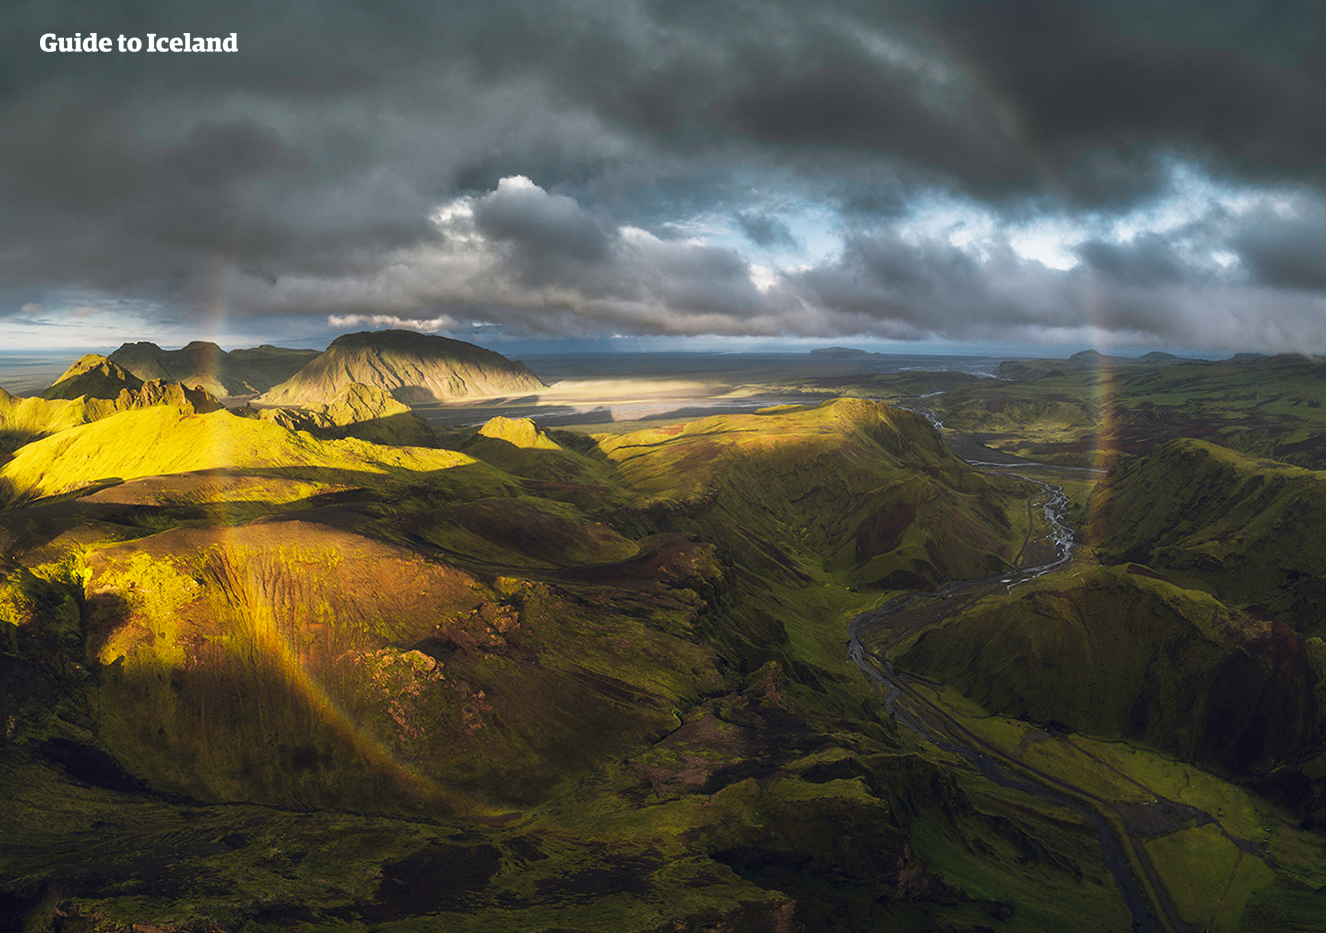 The Highlands of Iceland are only accessible during the summer months.